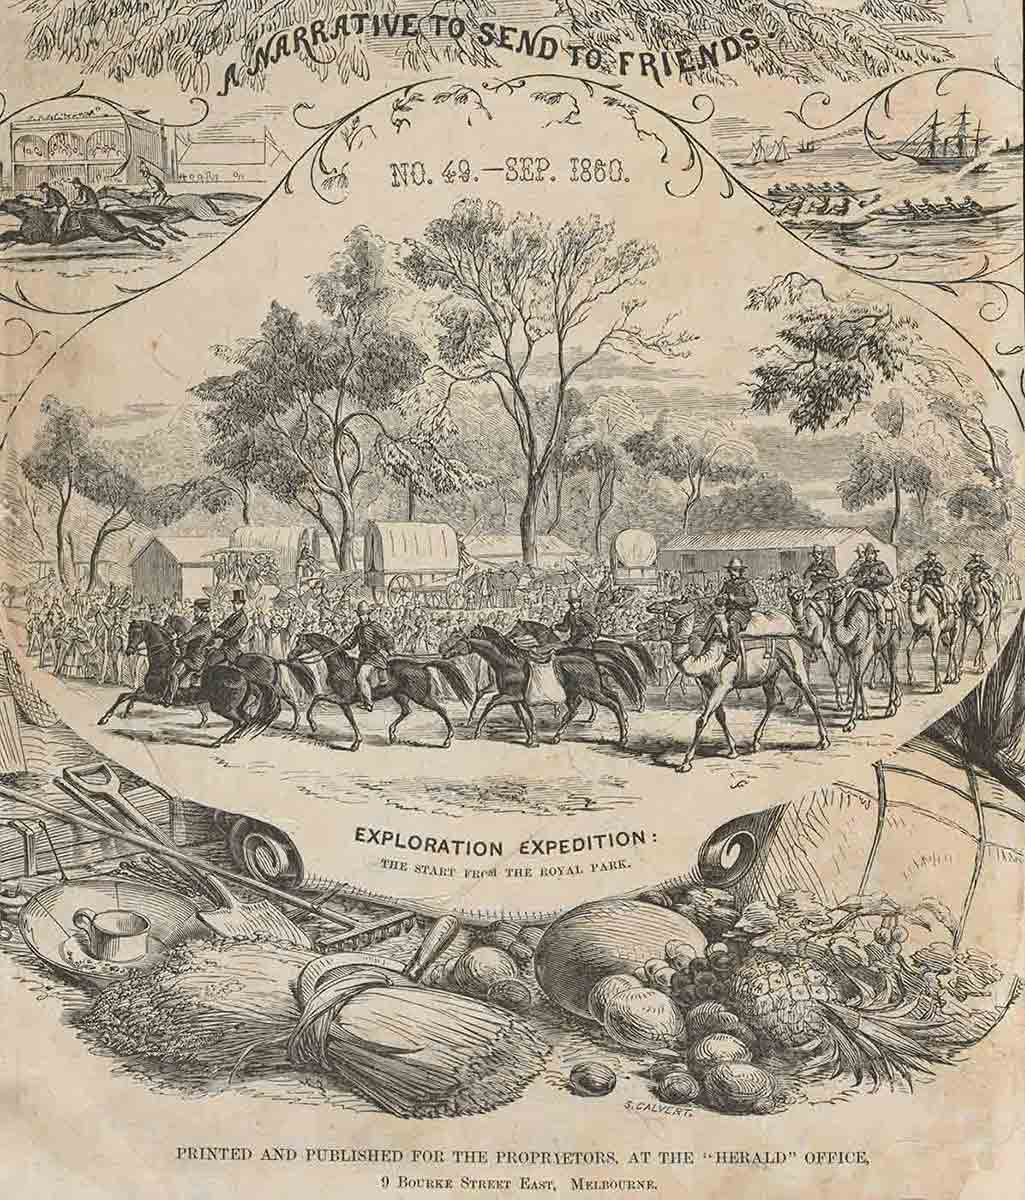 Commemorative wood engraving showing the men, horses and camels of the expedition. Title reads 'Exploration expedition: the start from the Royal park'. - click to view larger image